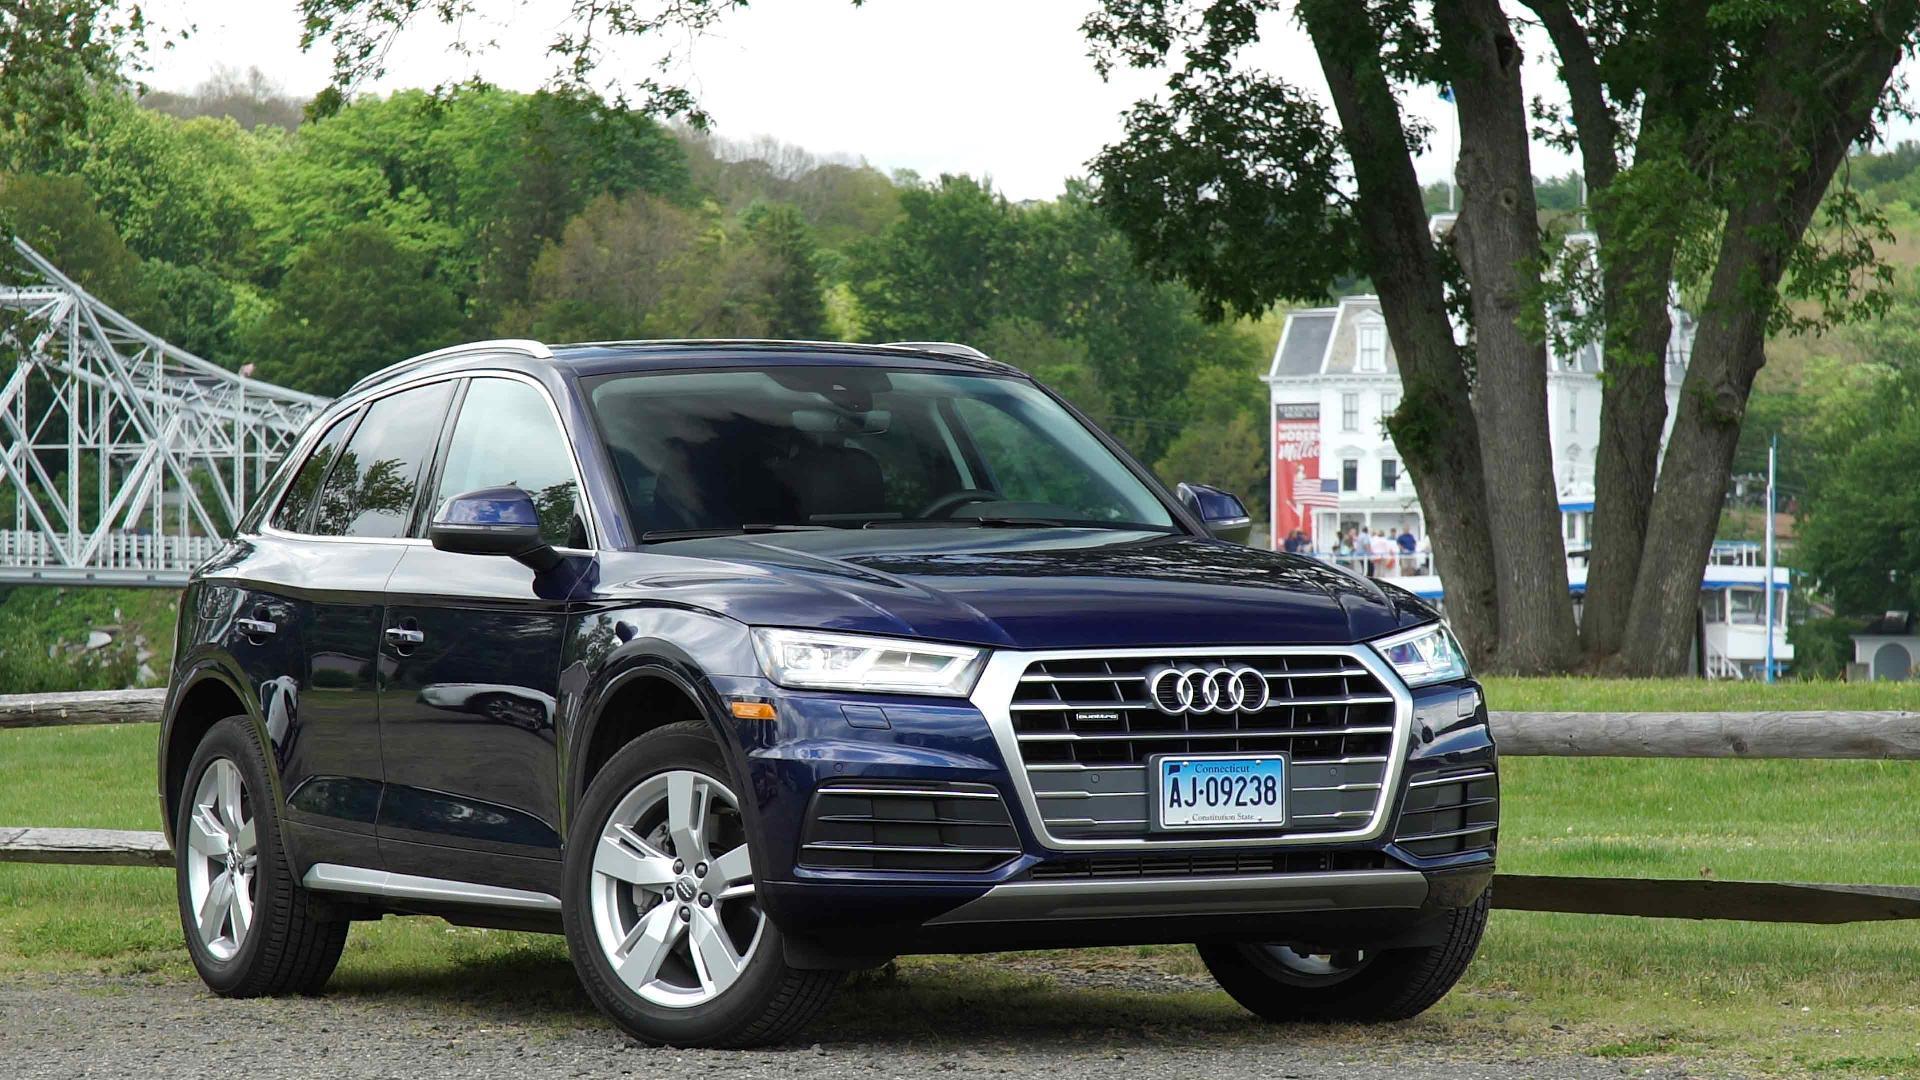 2018 Audi Q5 Is More Distinctive Than It Looks - Consumer Reports